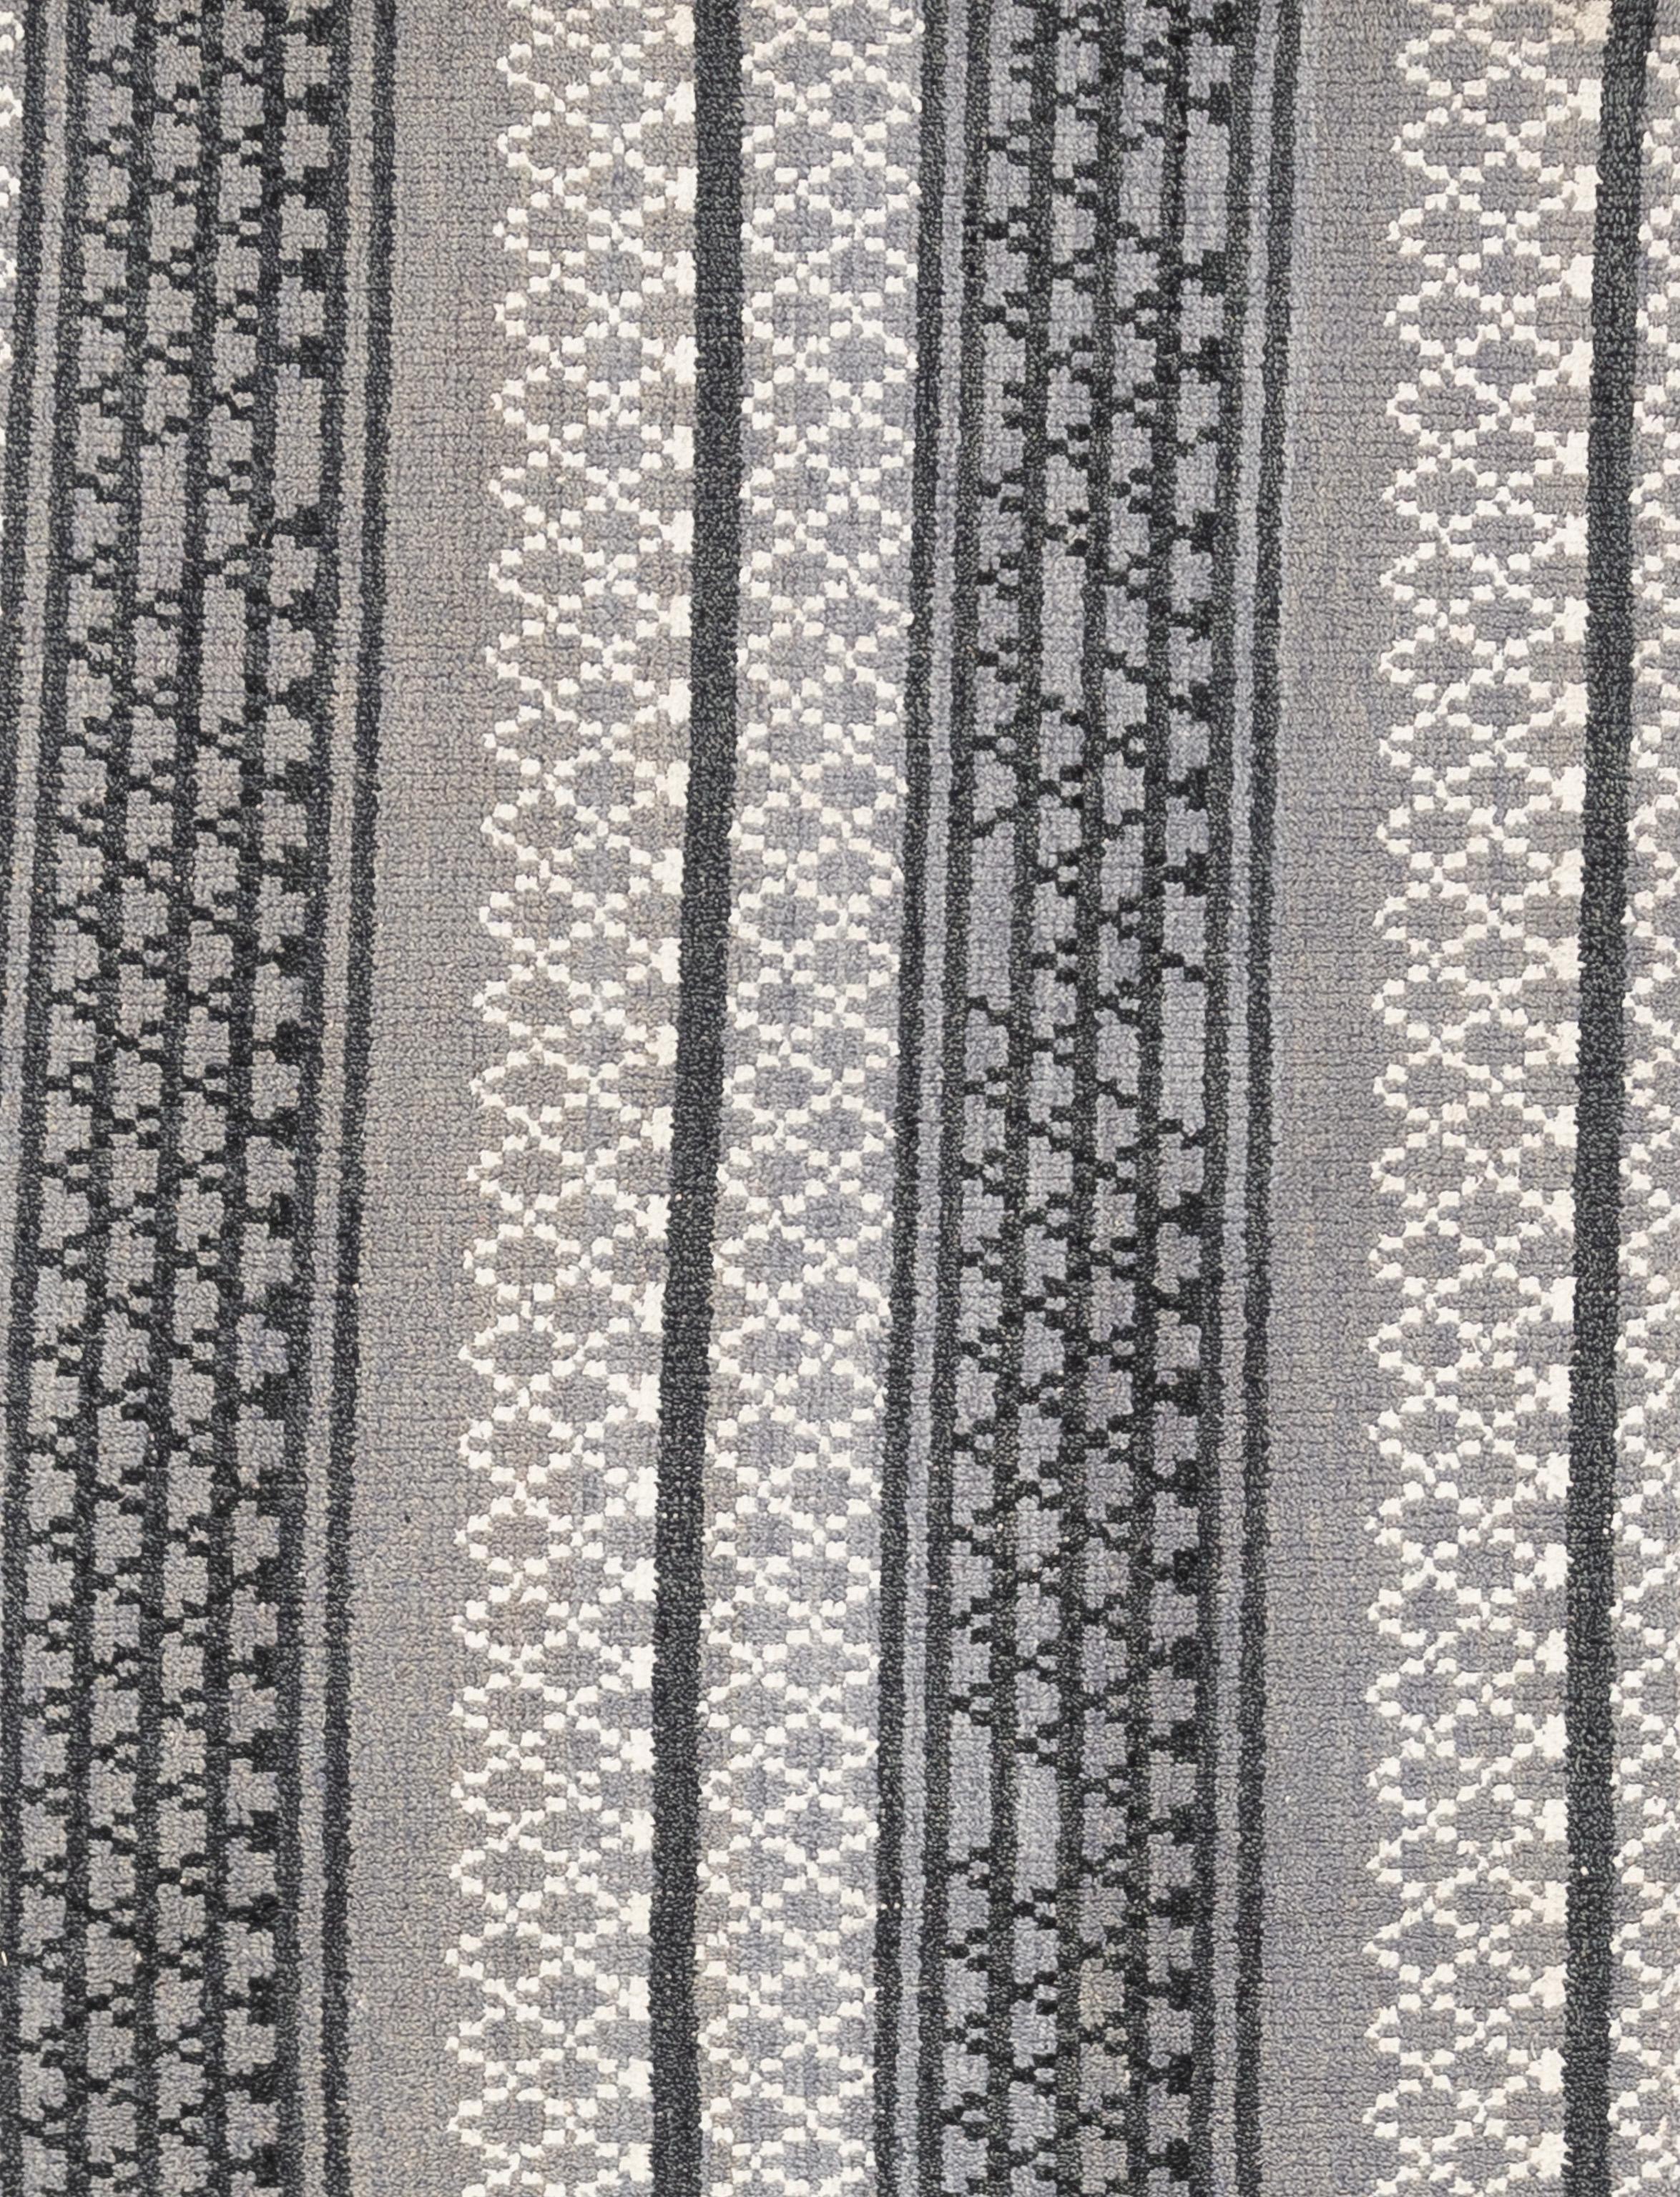 This beautifully handwoven with 100% pure handspun wool, features an end-to-end geometric tribal design in a crisp pallet of grey, ivory, and deep blue. 

Size - 8'2